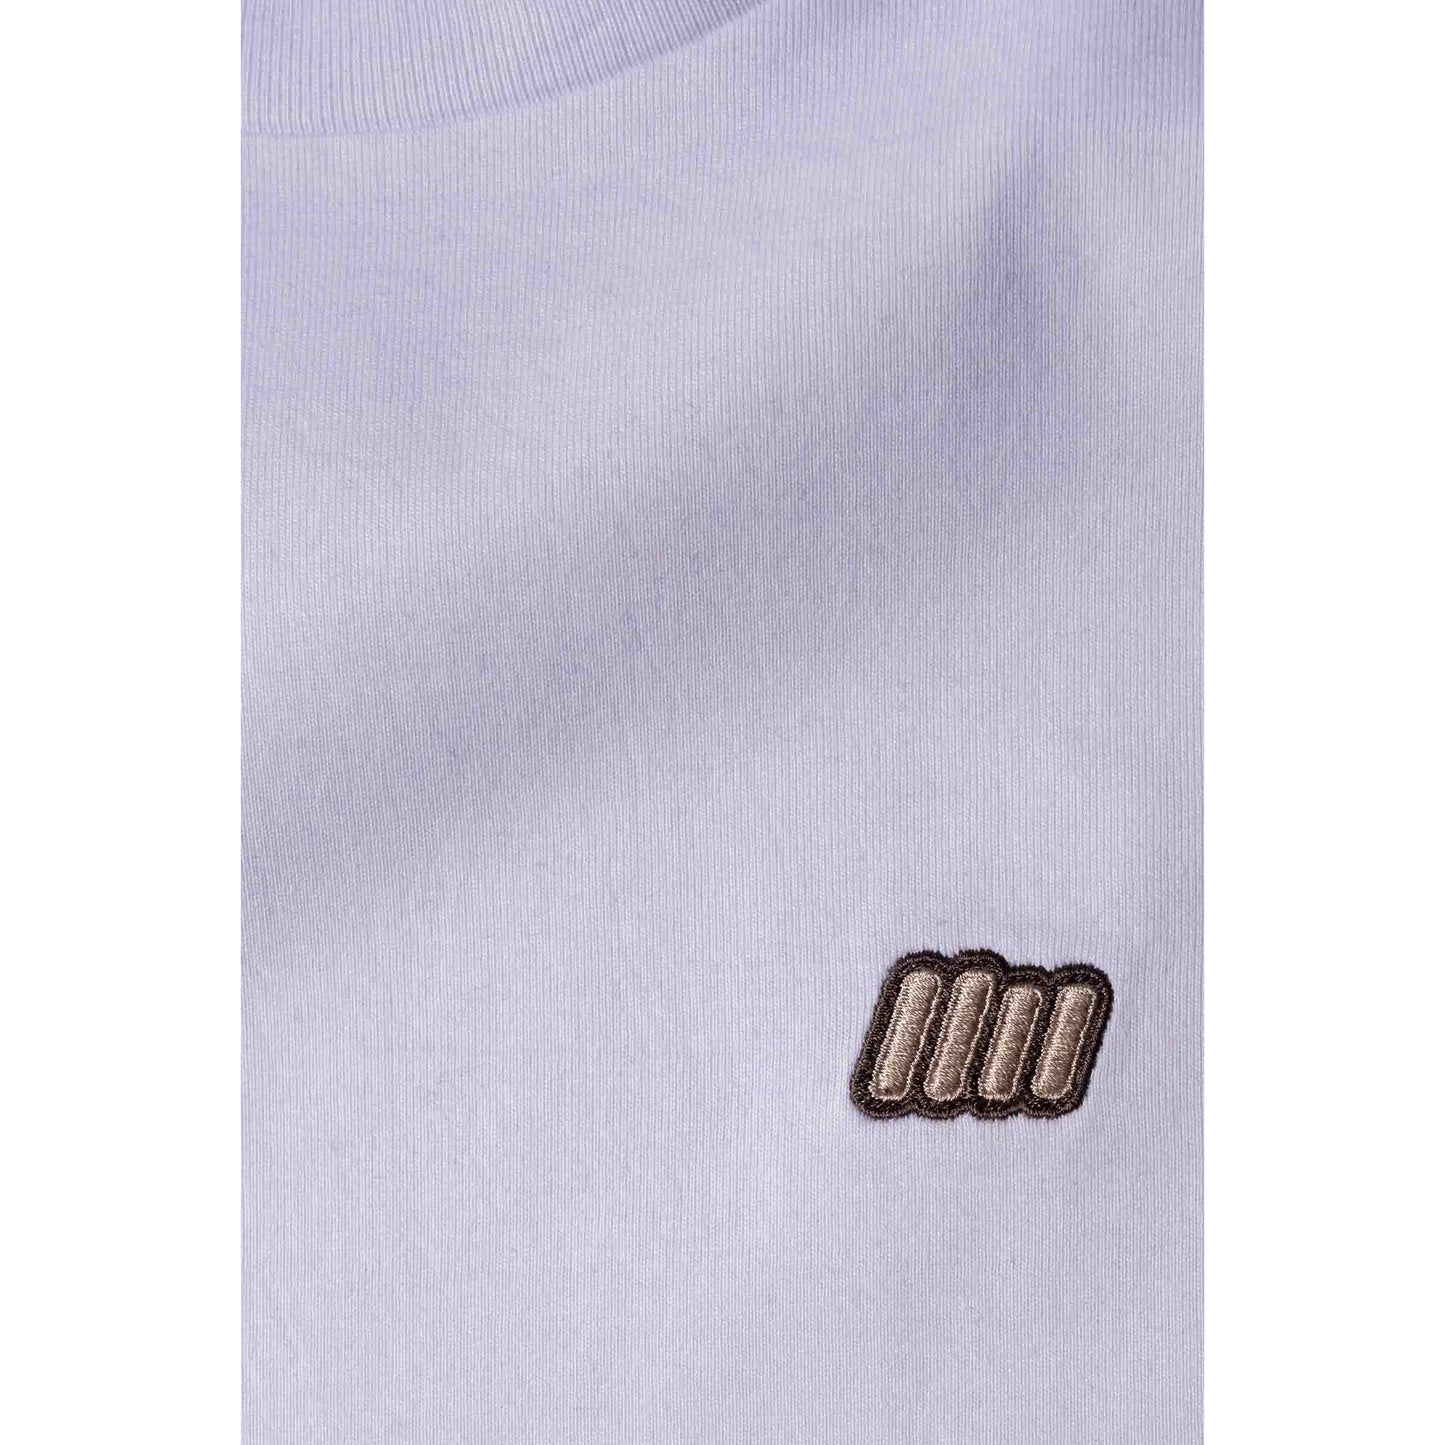 Essentials Tee - White (light brown embroidery) - Standard Fit